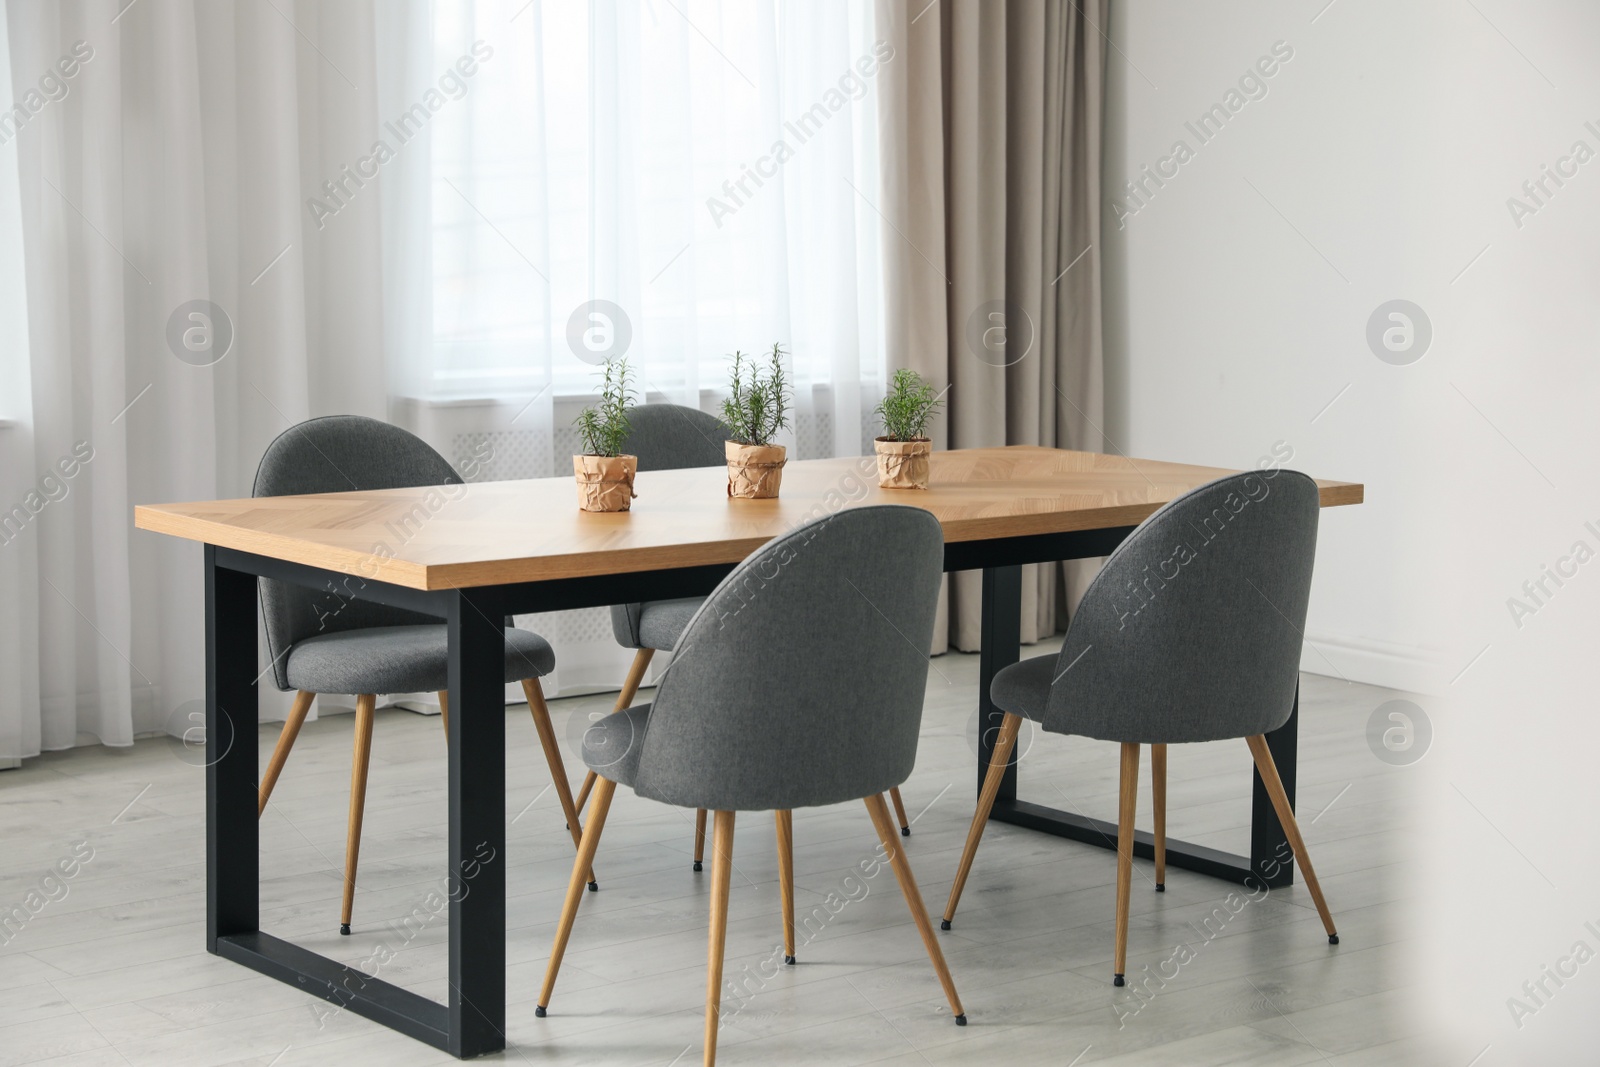 Photo of Modern room interior with chairs and table